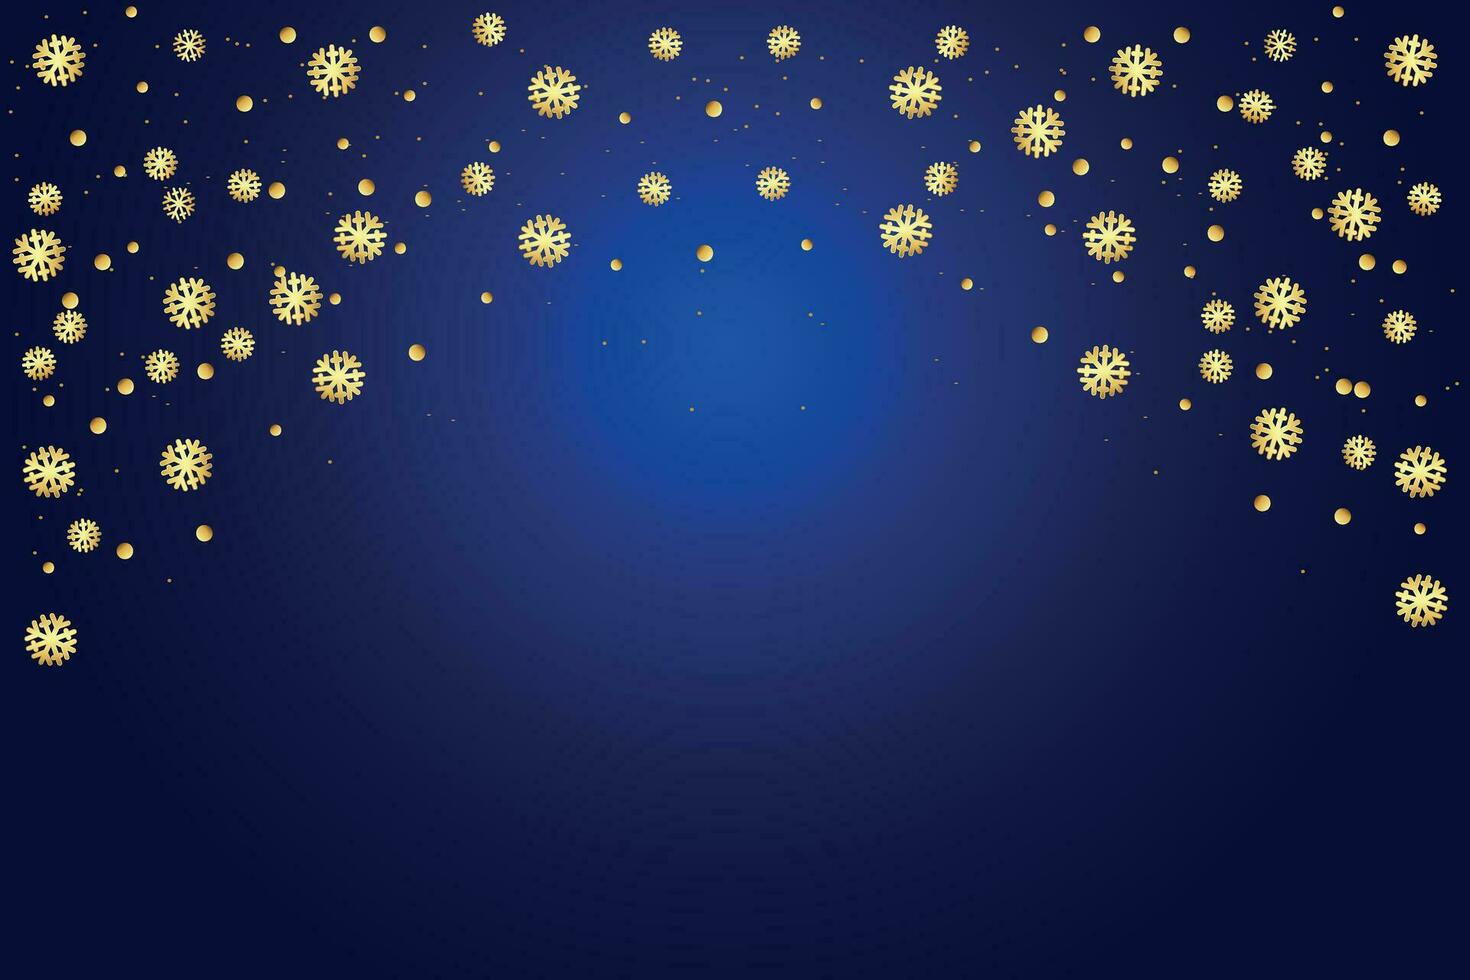 Background. Scattered golden snowflakes and small golden balls on blue. Festive background or design element. vector